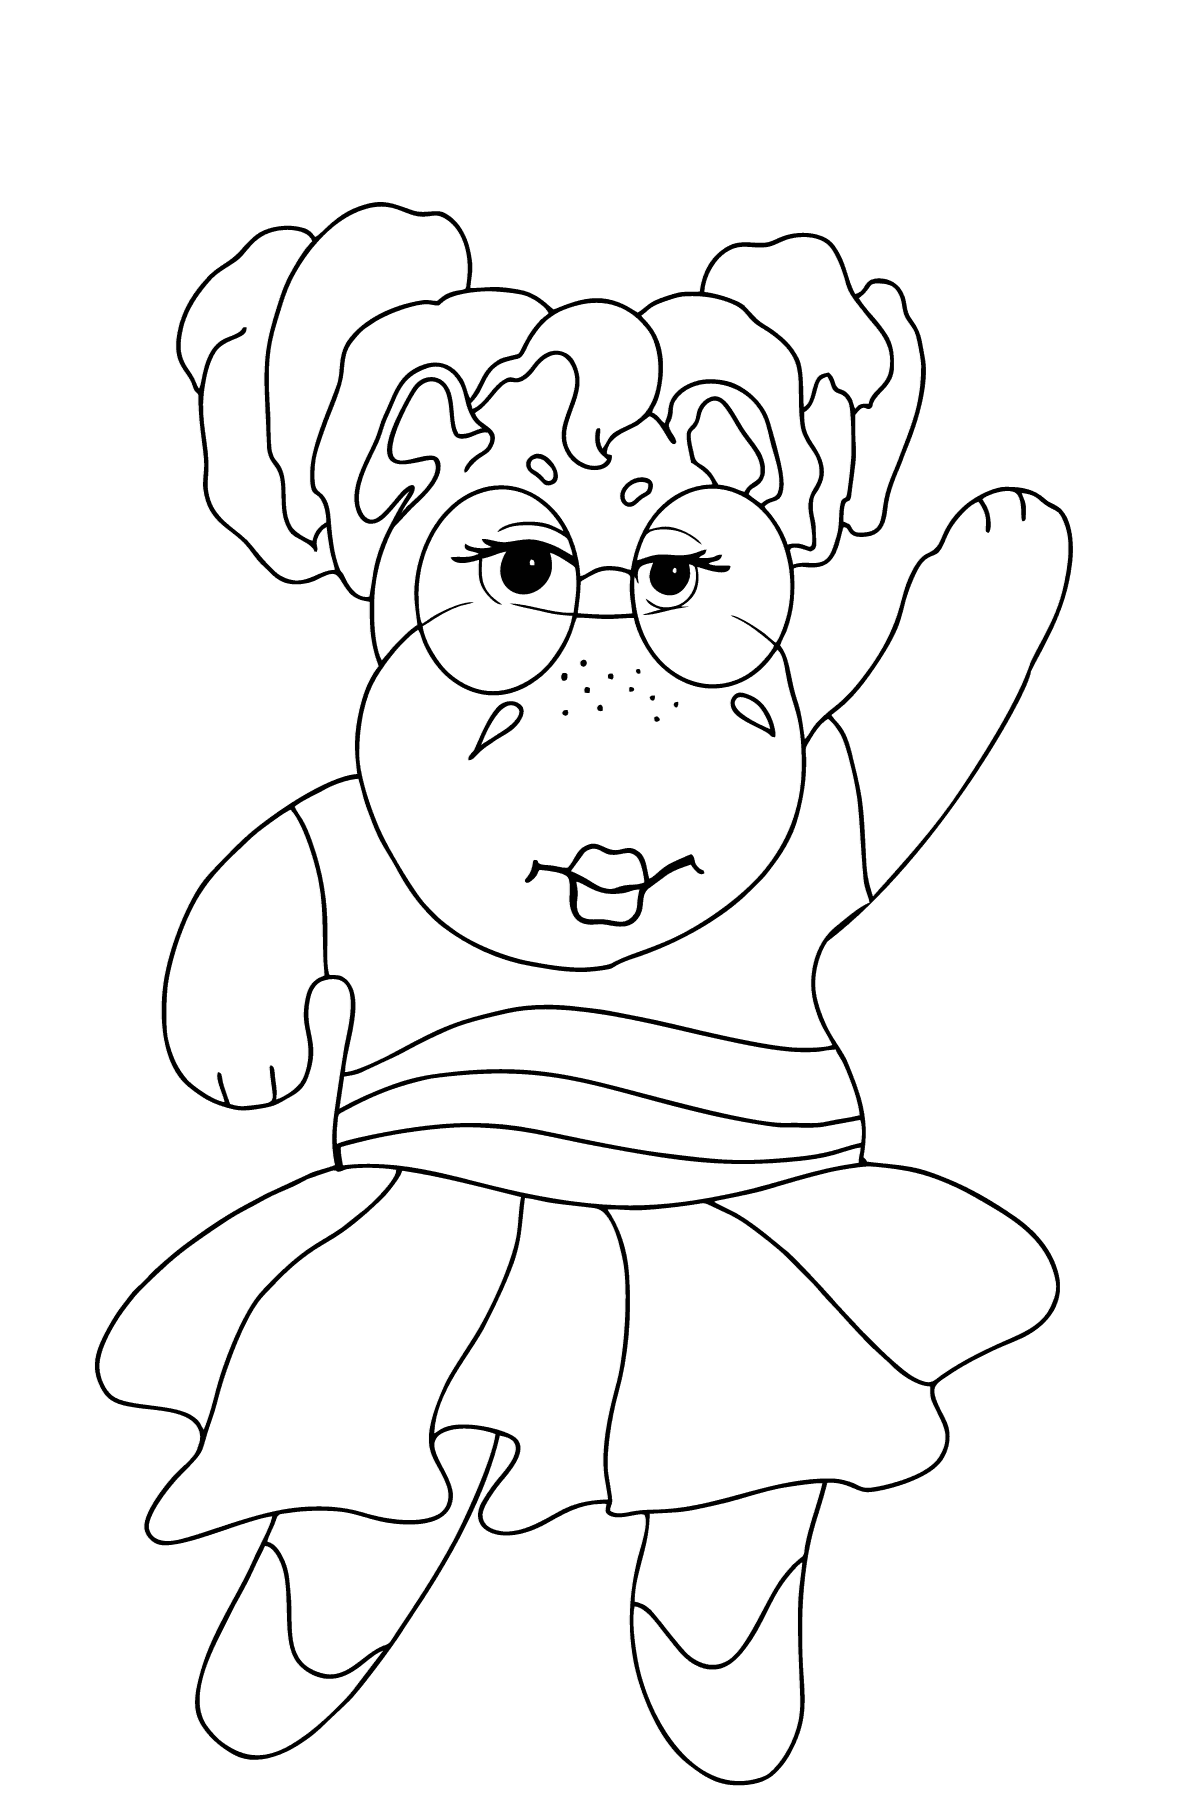 Dancing Hippo coloring page - Coloring Pages for Kids